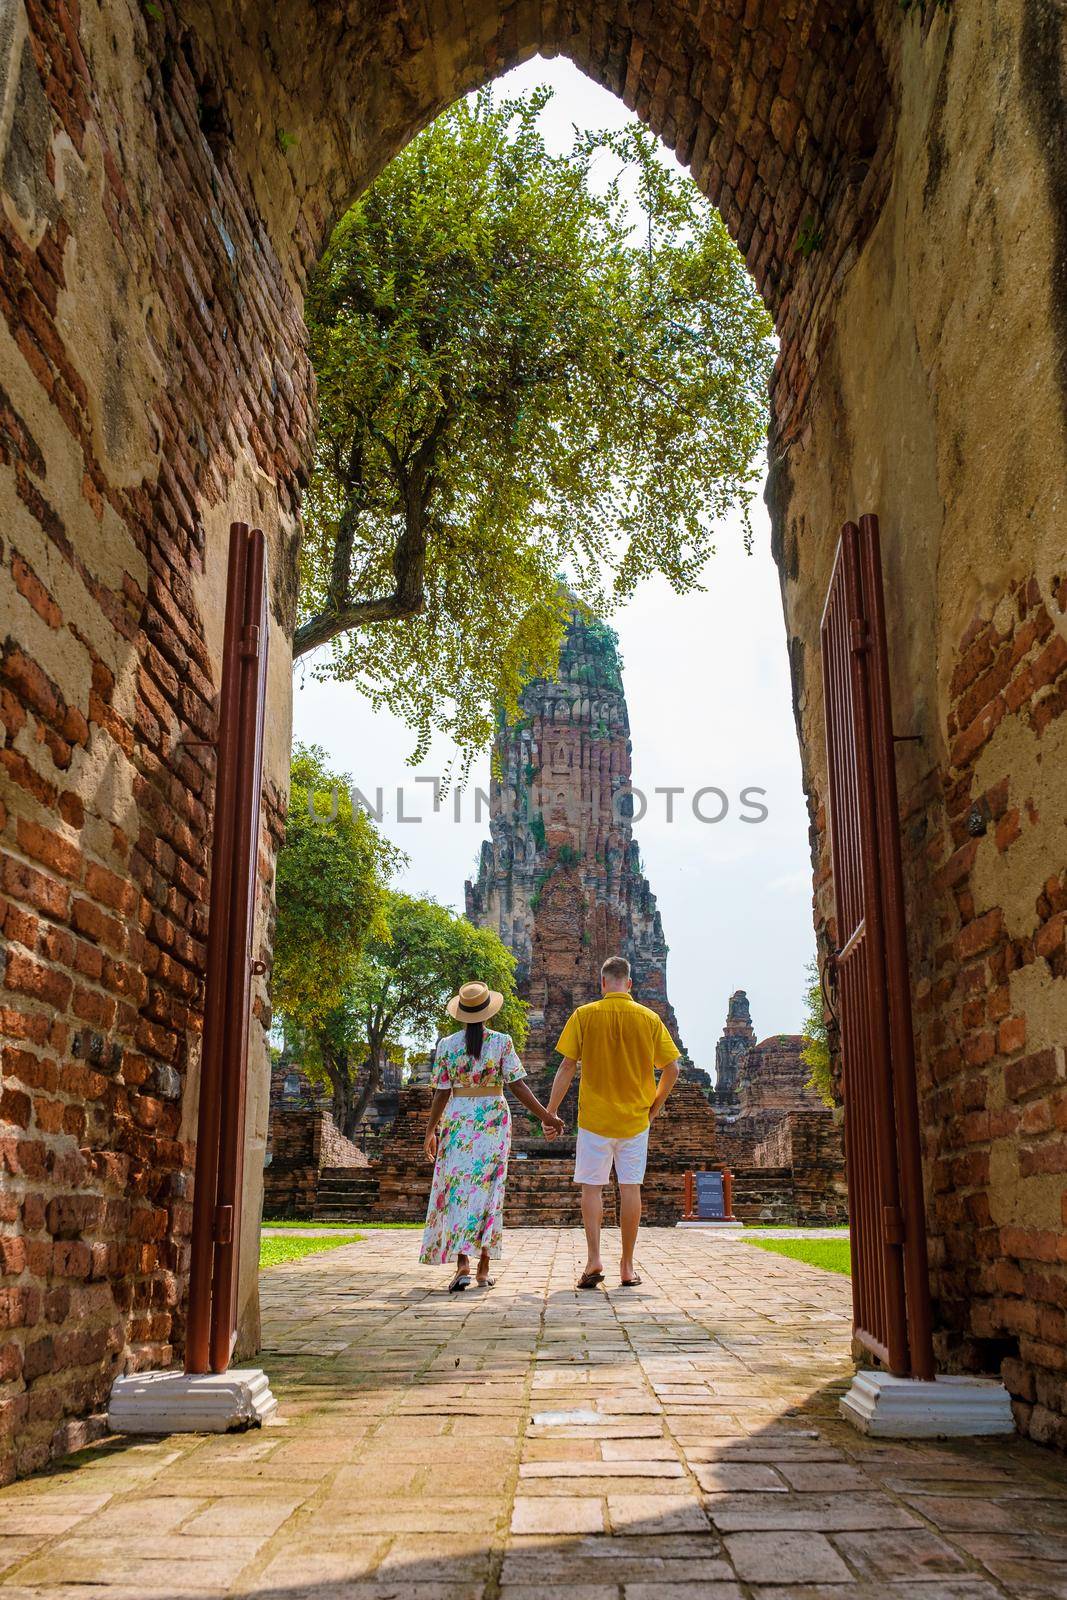 Ayutthaya, Thailand at Wat Phra Ram, a couple of men and women with a hat visiting Ayyuthaya Thailand. Tourist with map in Thailand